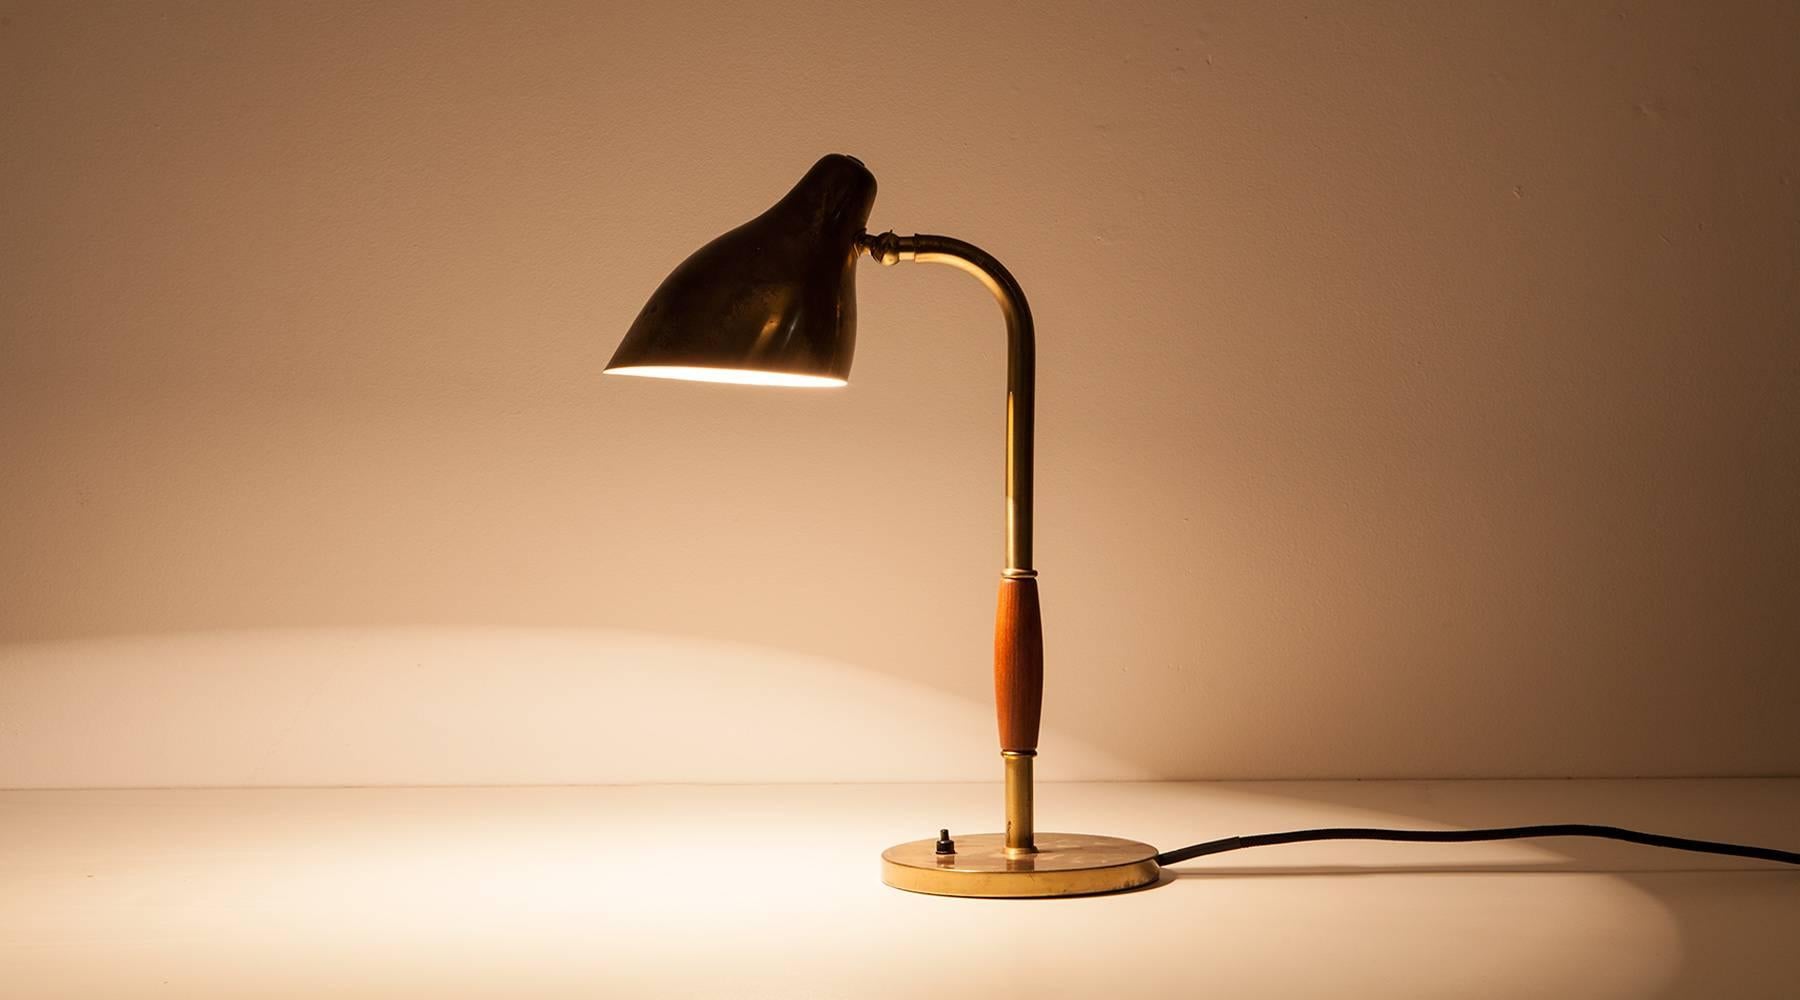 Vilhelm Lauritzen table lamp with adjustable shade from 1948. Slightly curved conical shade. Stem partly covered with teak. Lamp is in a very good condition with a lovely patina. Manufactured by Louis Poulsen.

Vilhelm Lauritzen is one of the most